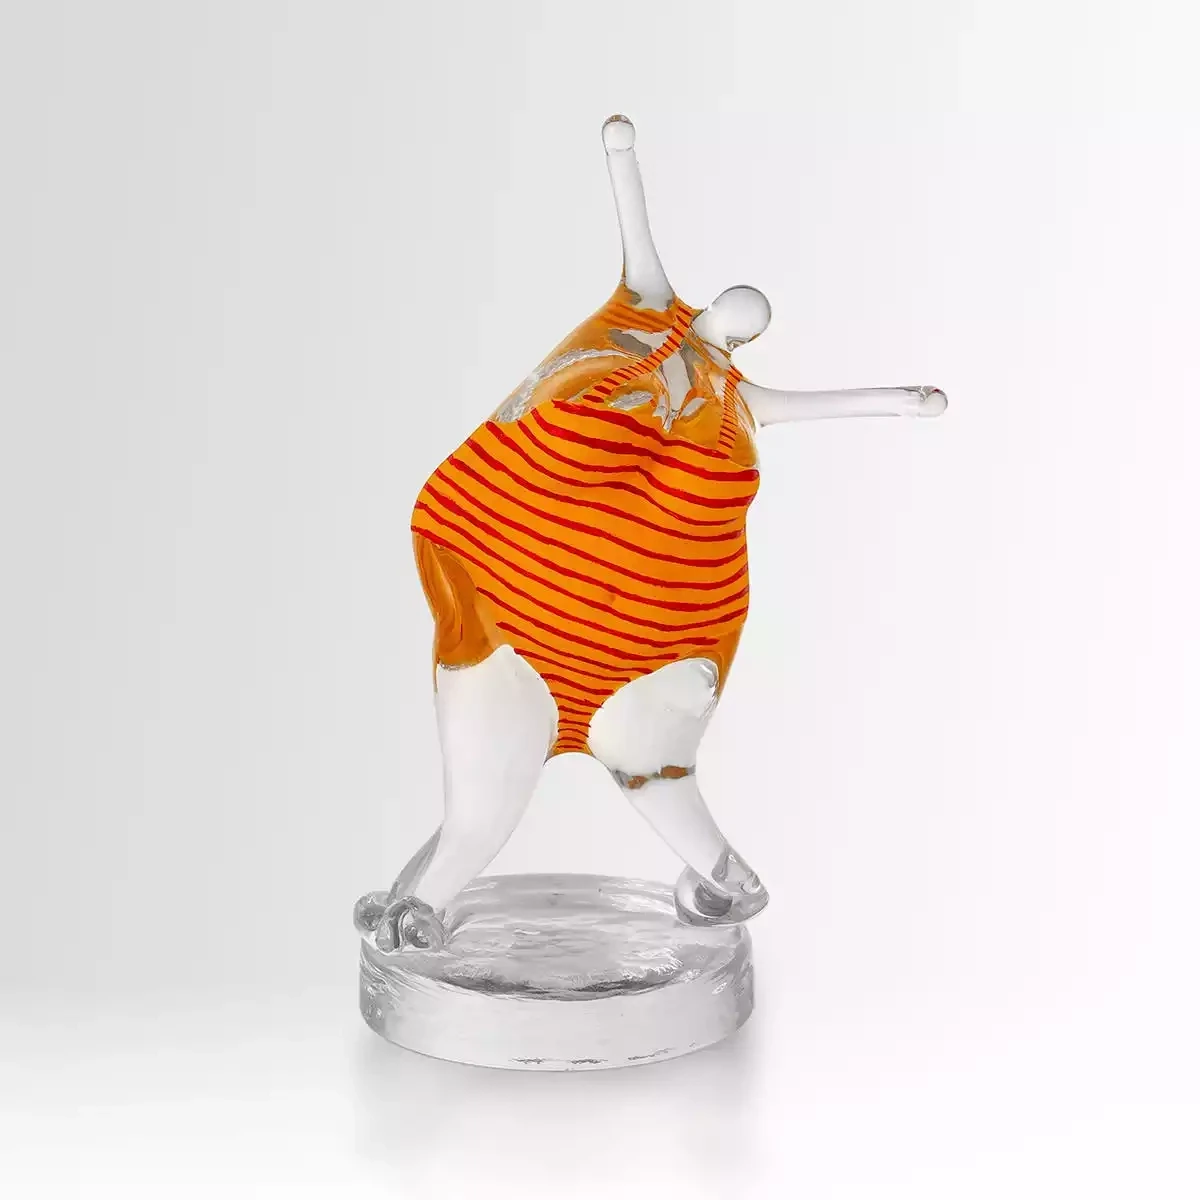 Happiness Bather Glass Sculpture - Red and Yellow by Kosta Boda